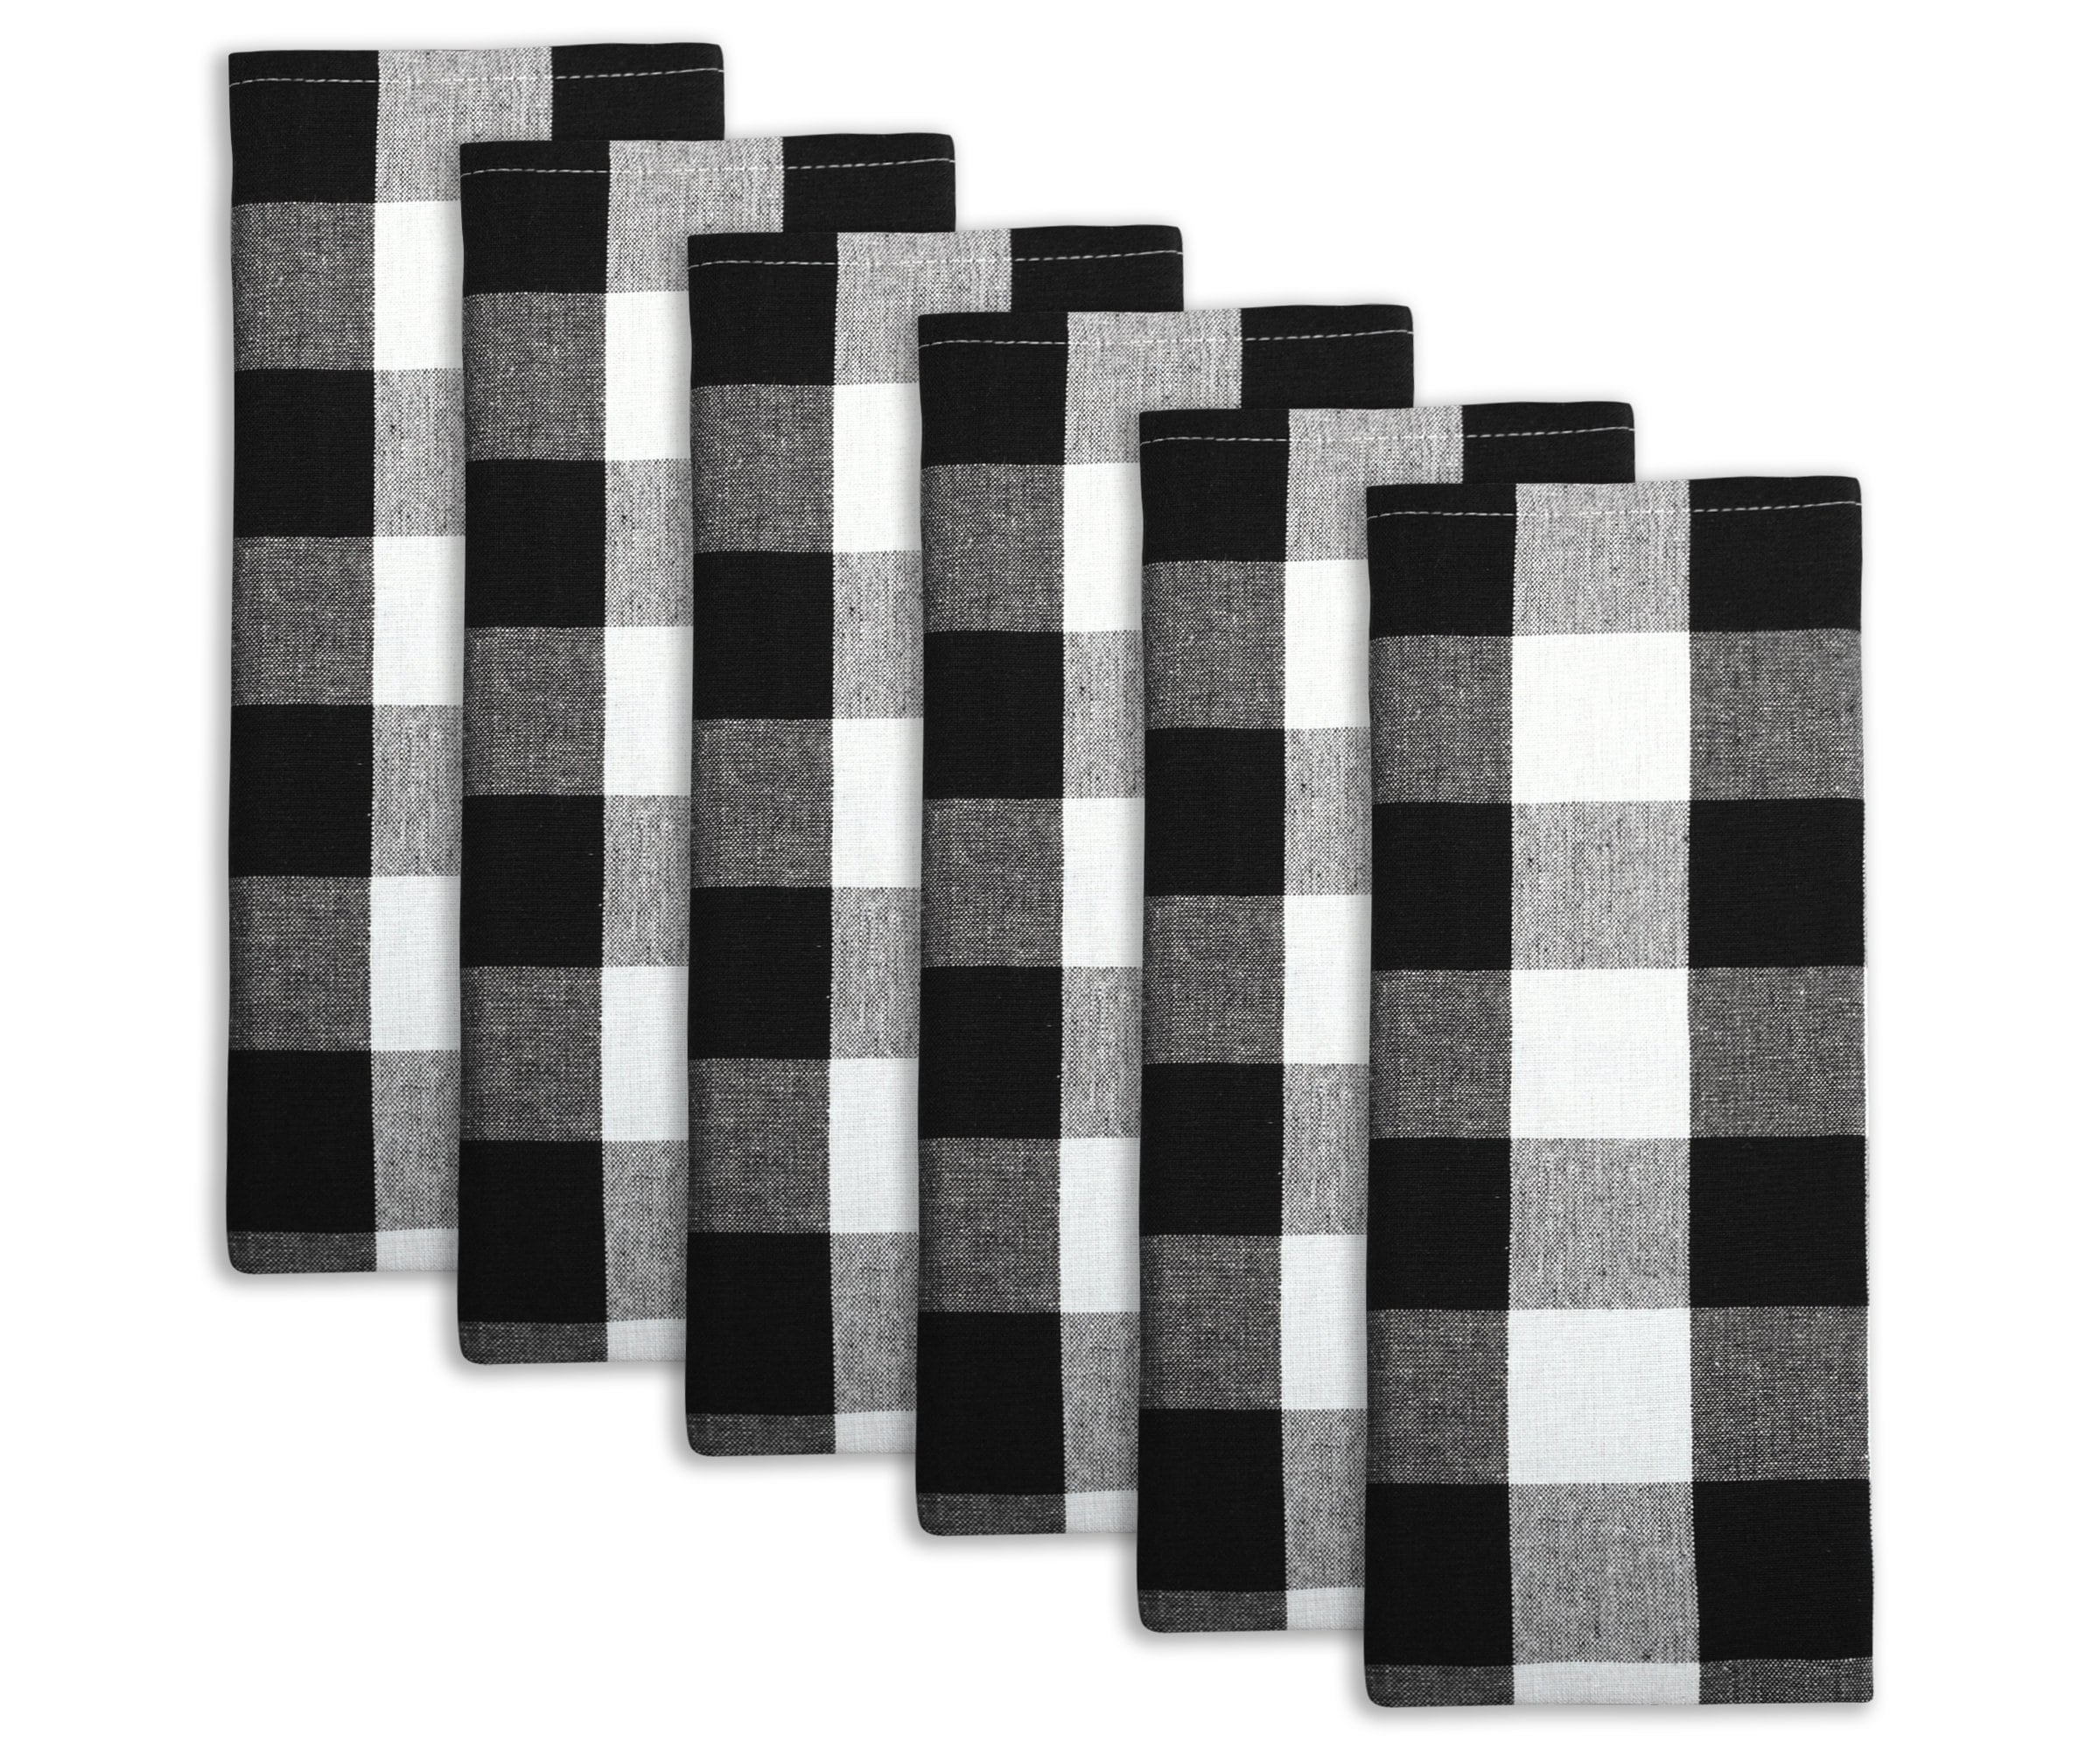 Kitchen Towels And Dish Towels, Winter Black And White Checkered